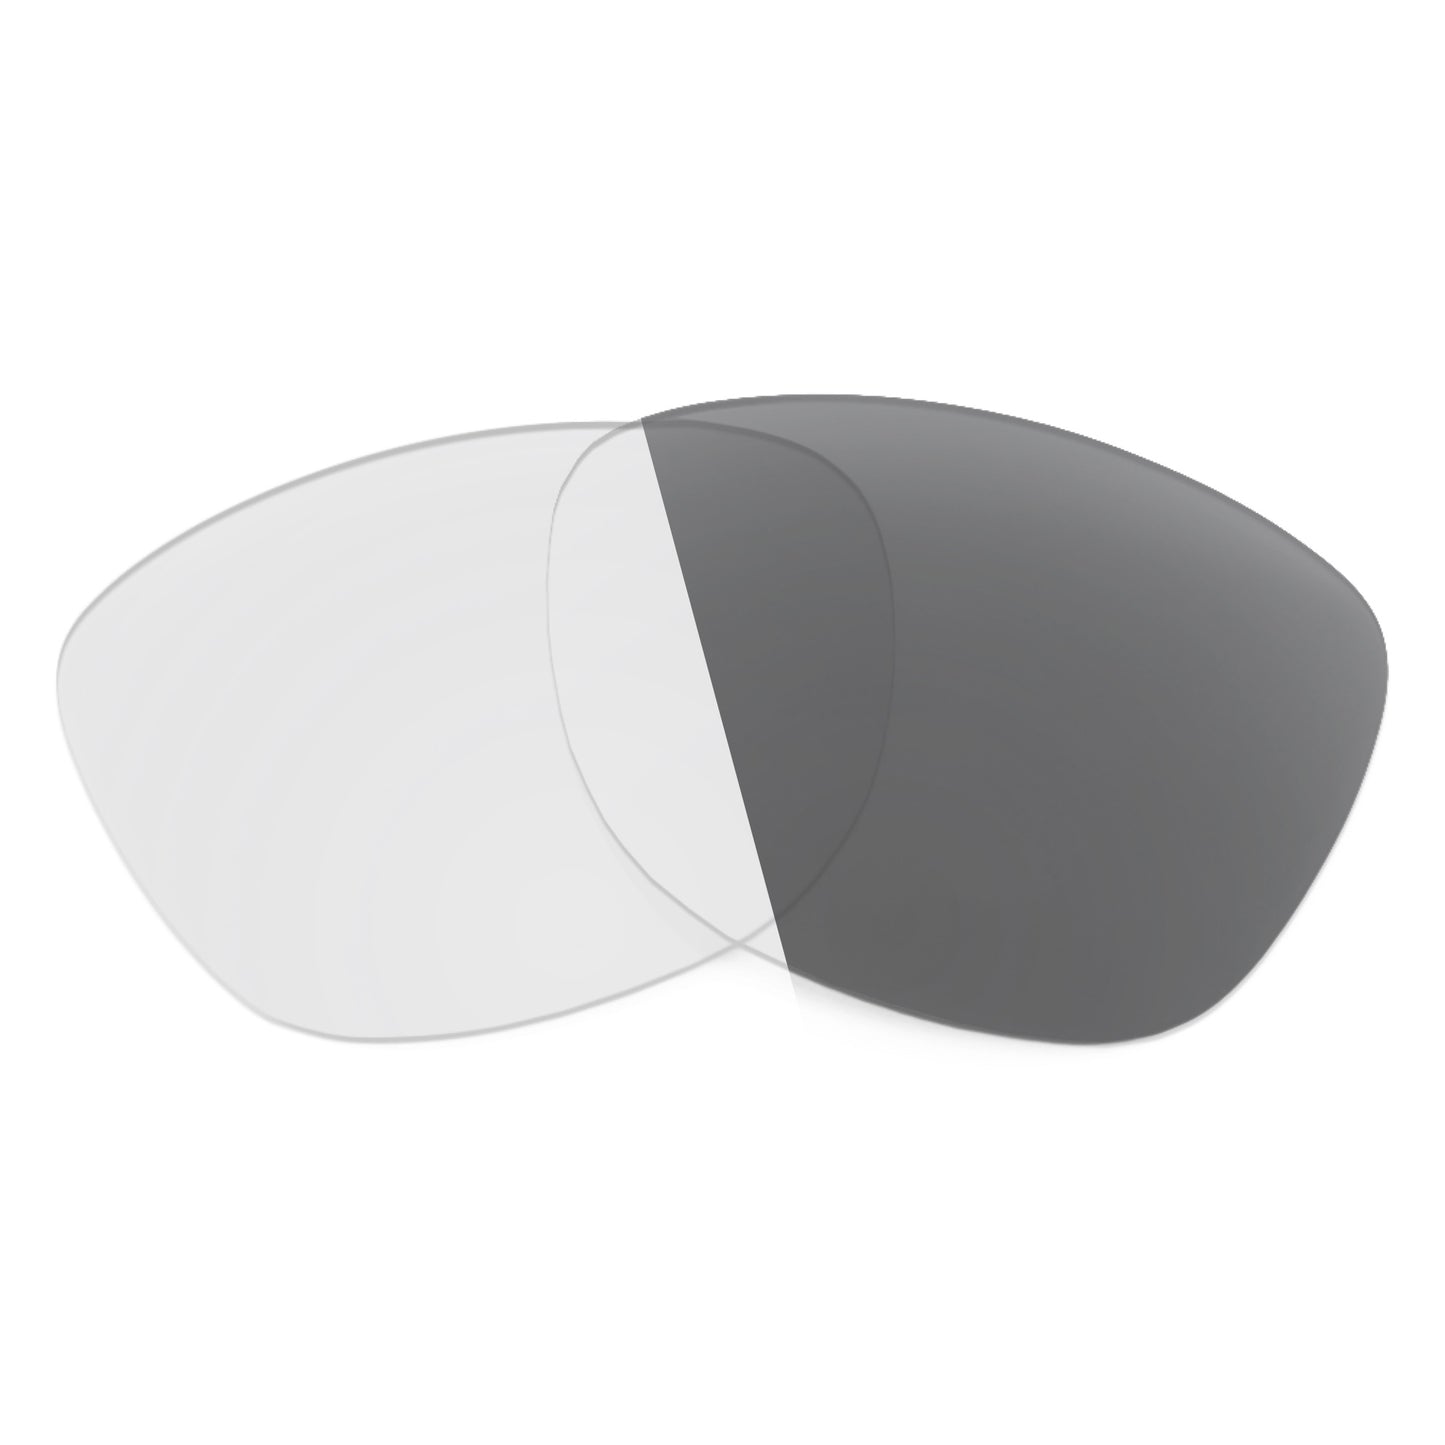 Revant replacement lenses for Ray-Ban RB3546 52mm Non-Polarized Adapt Gray Photochromic